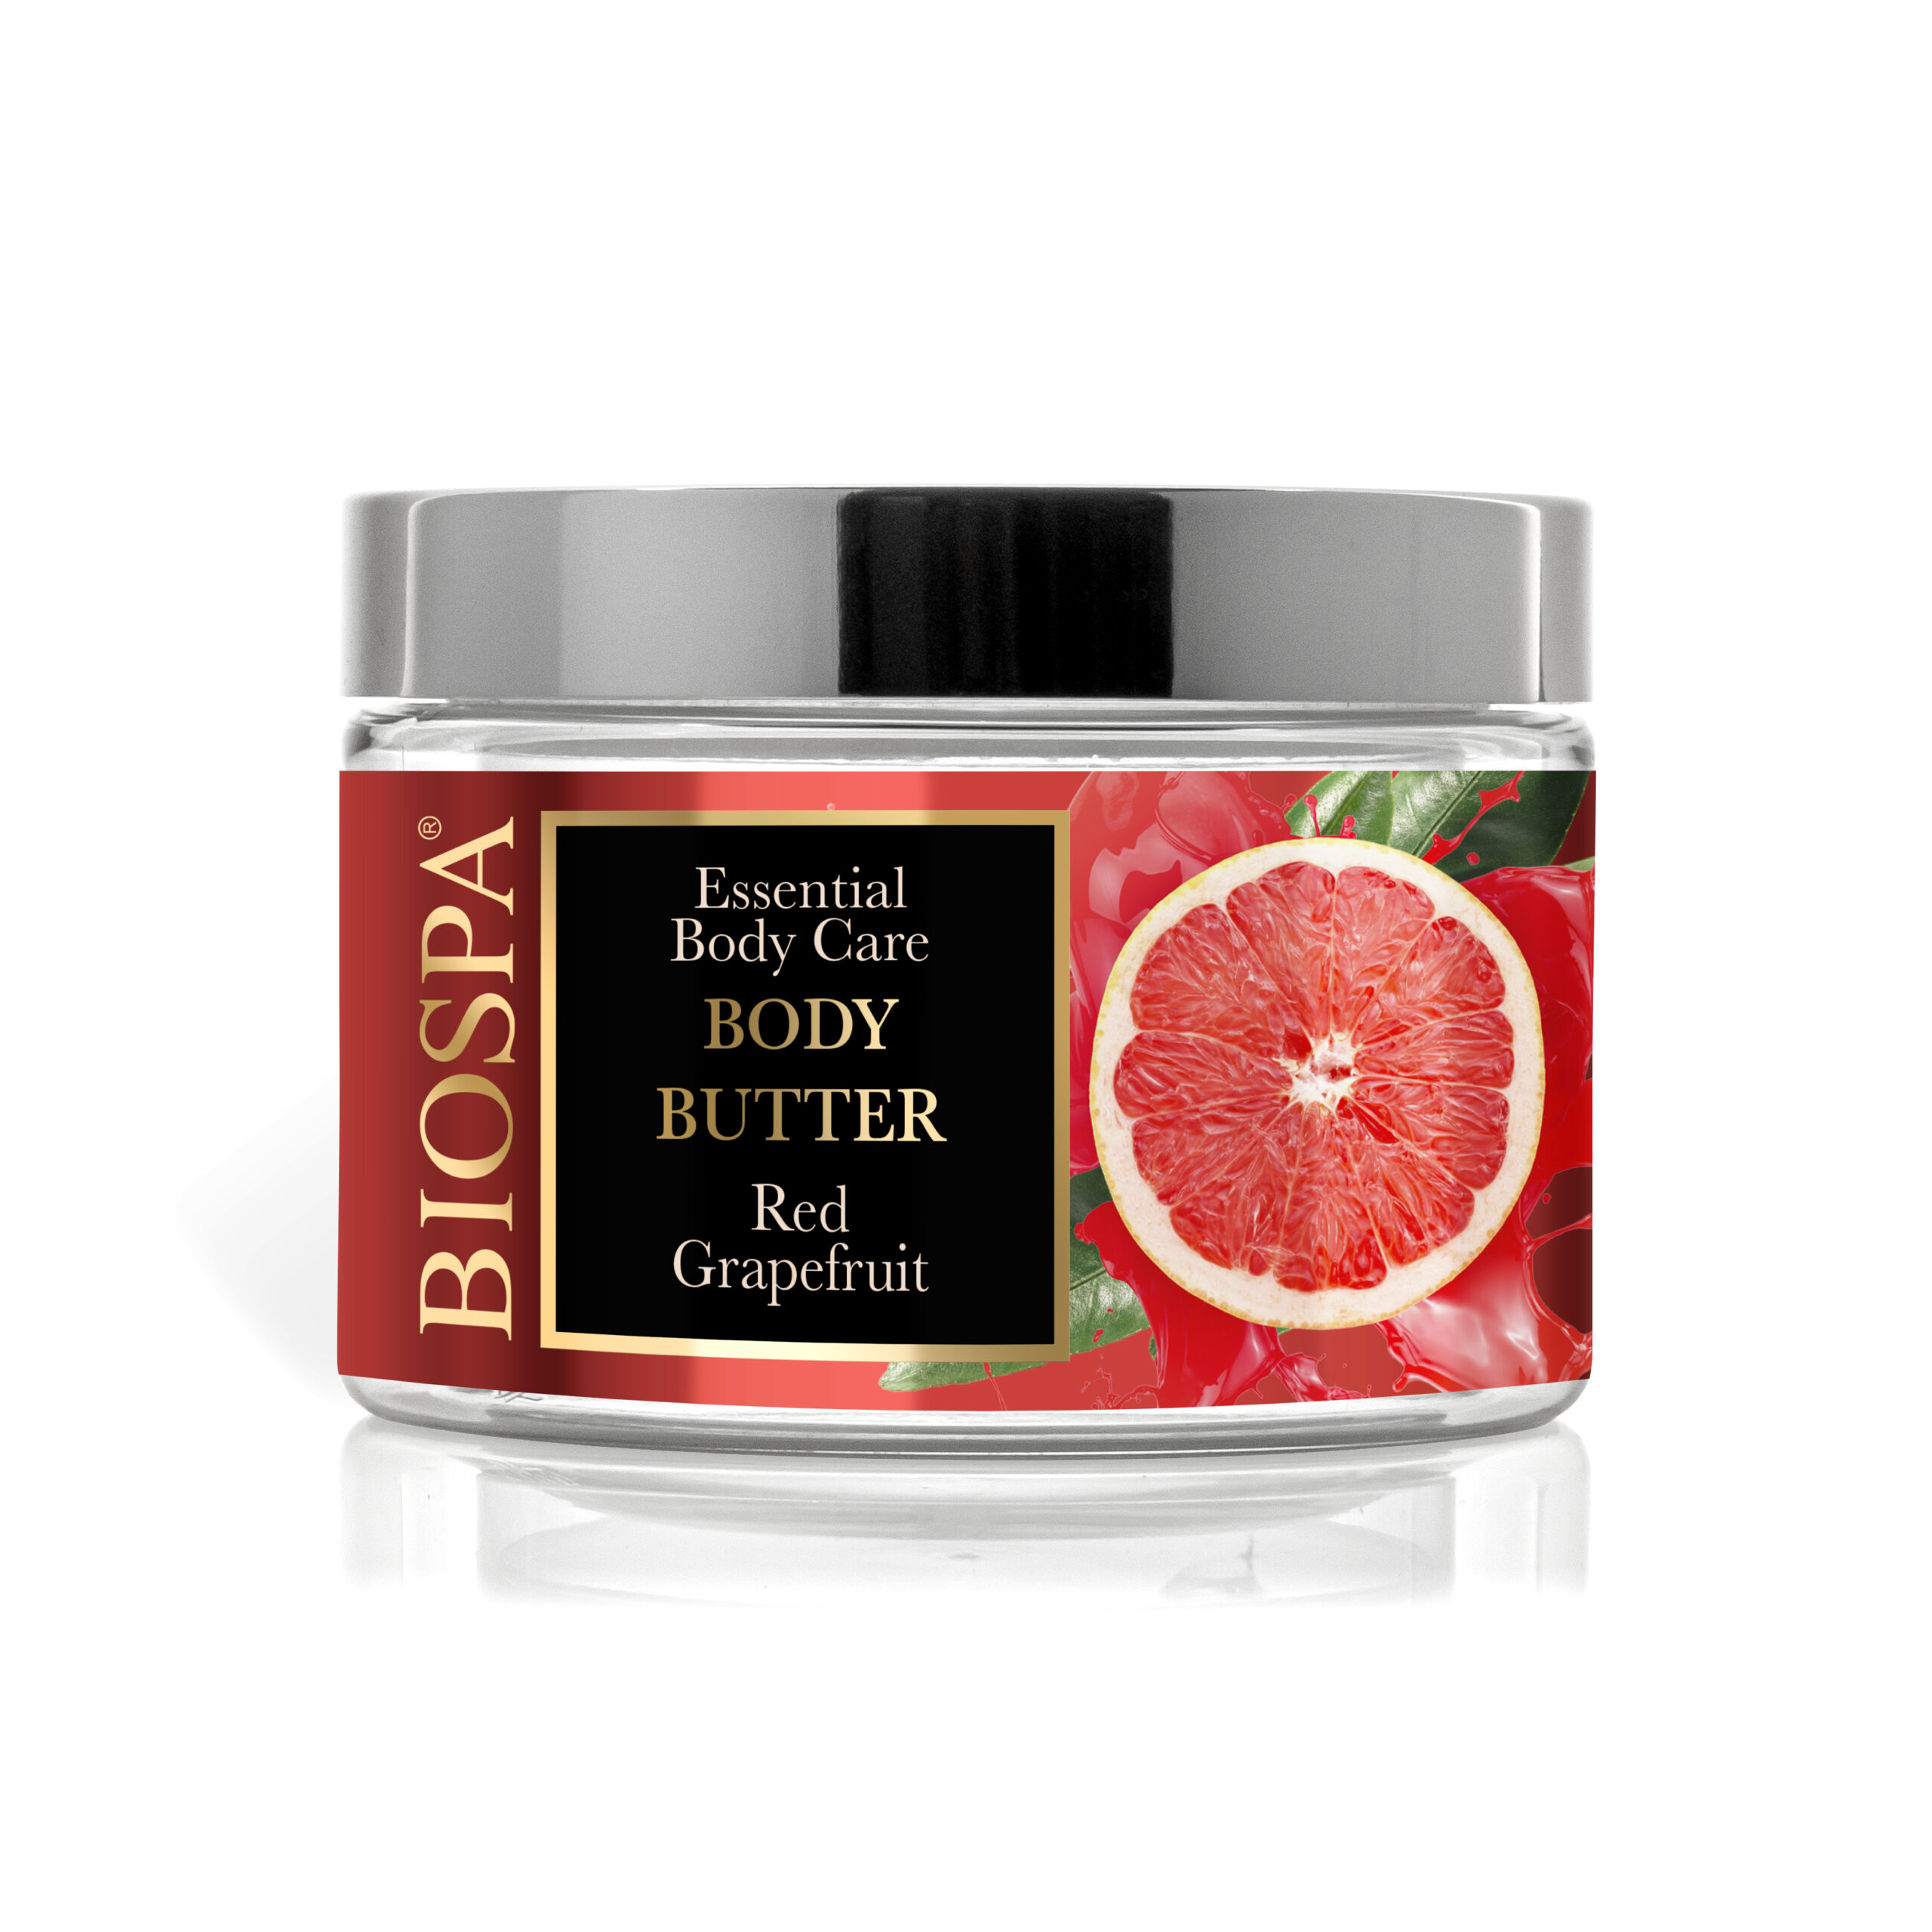 Red Grapefruit body butter copy